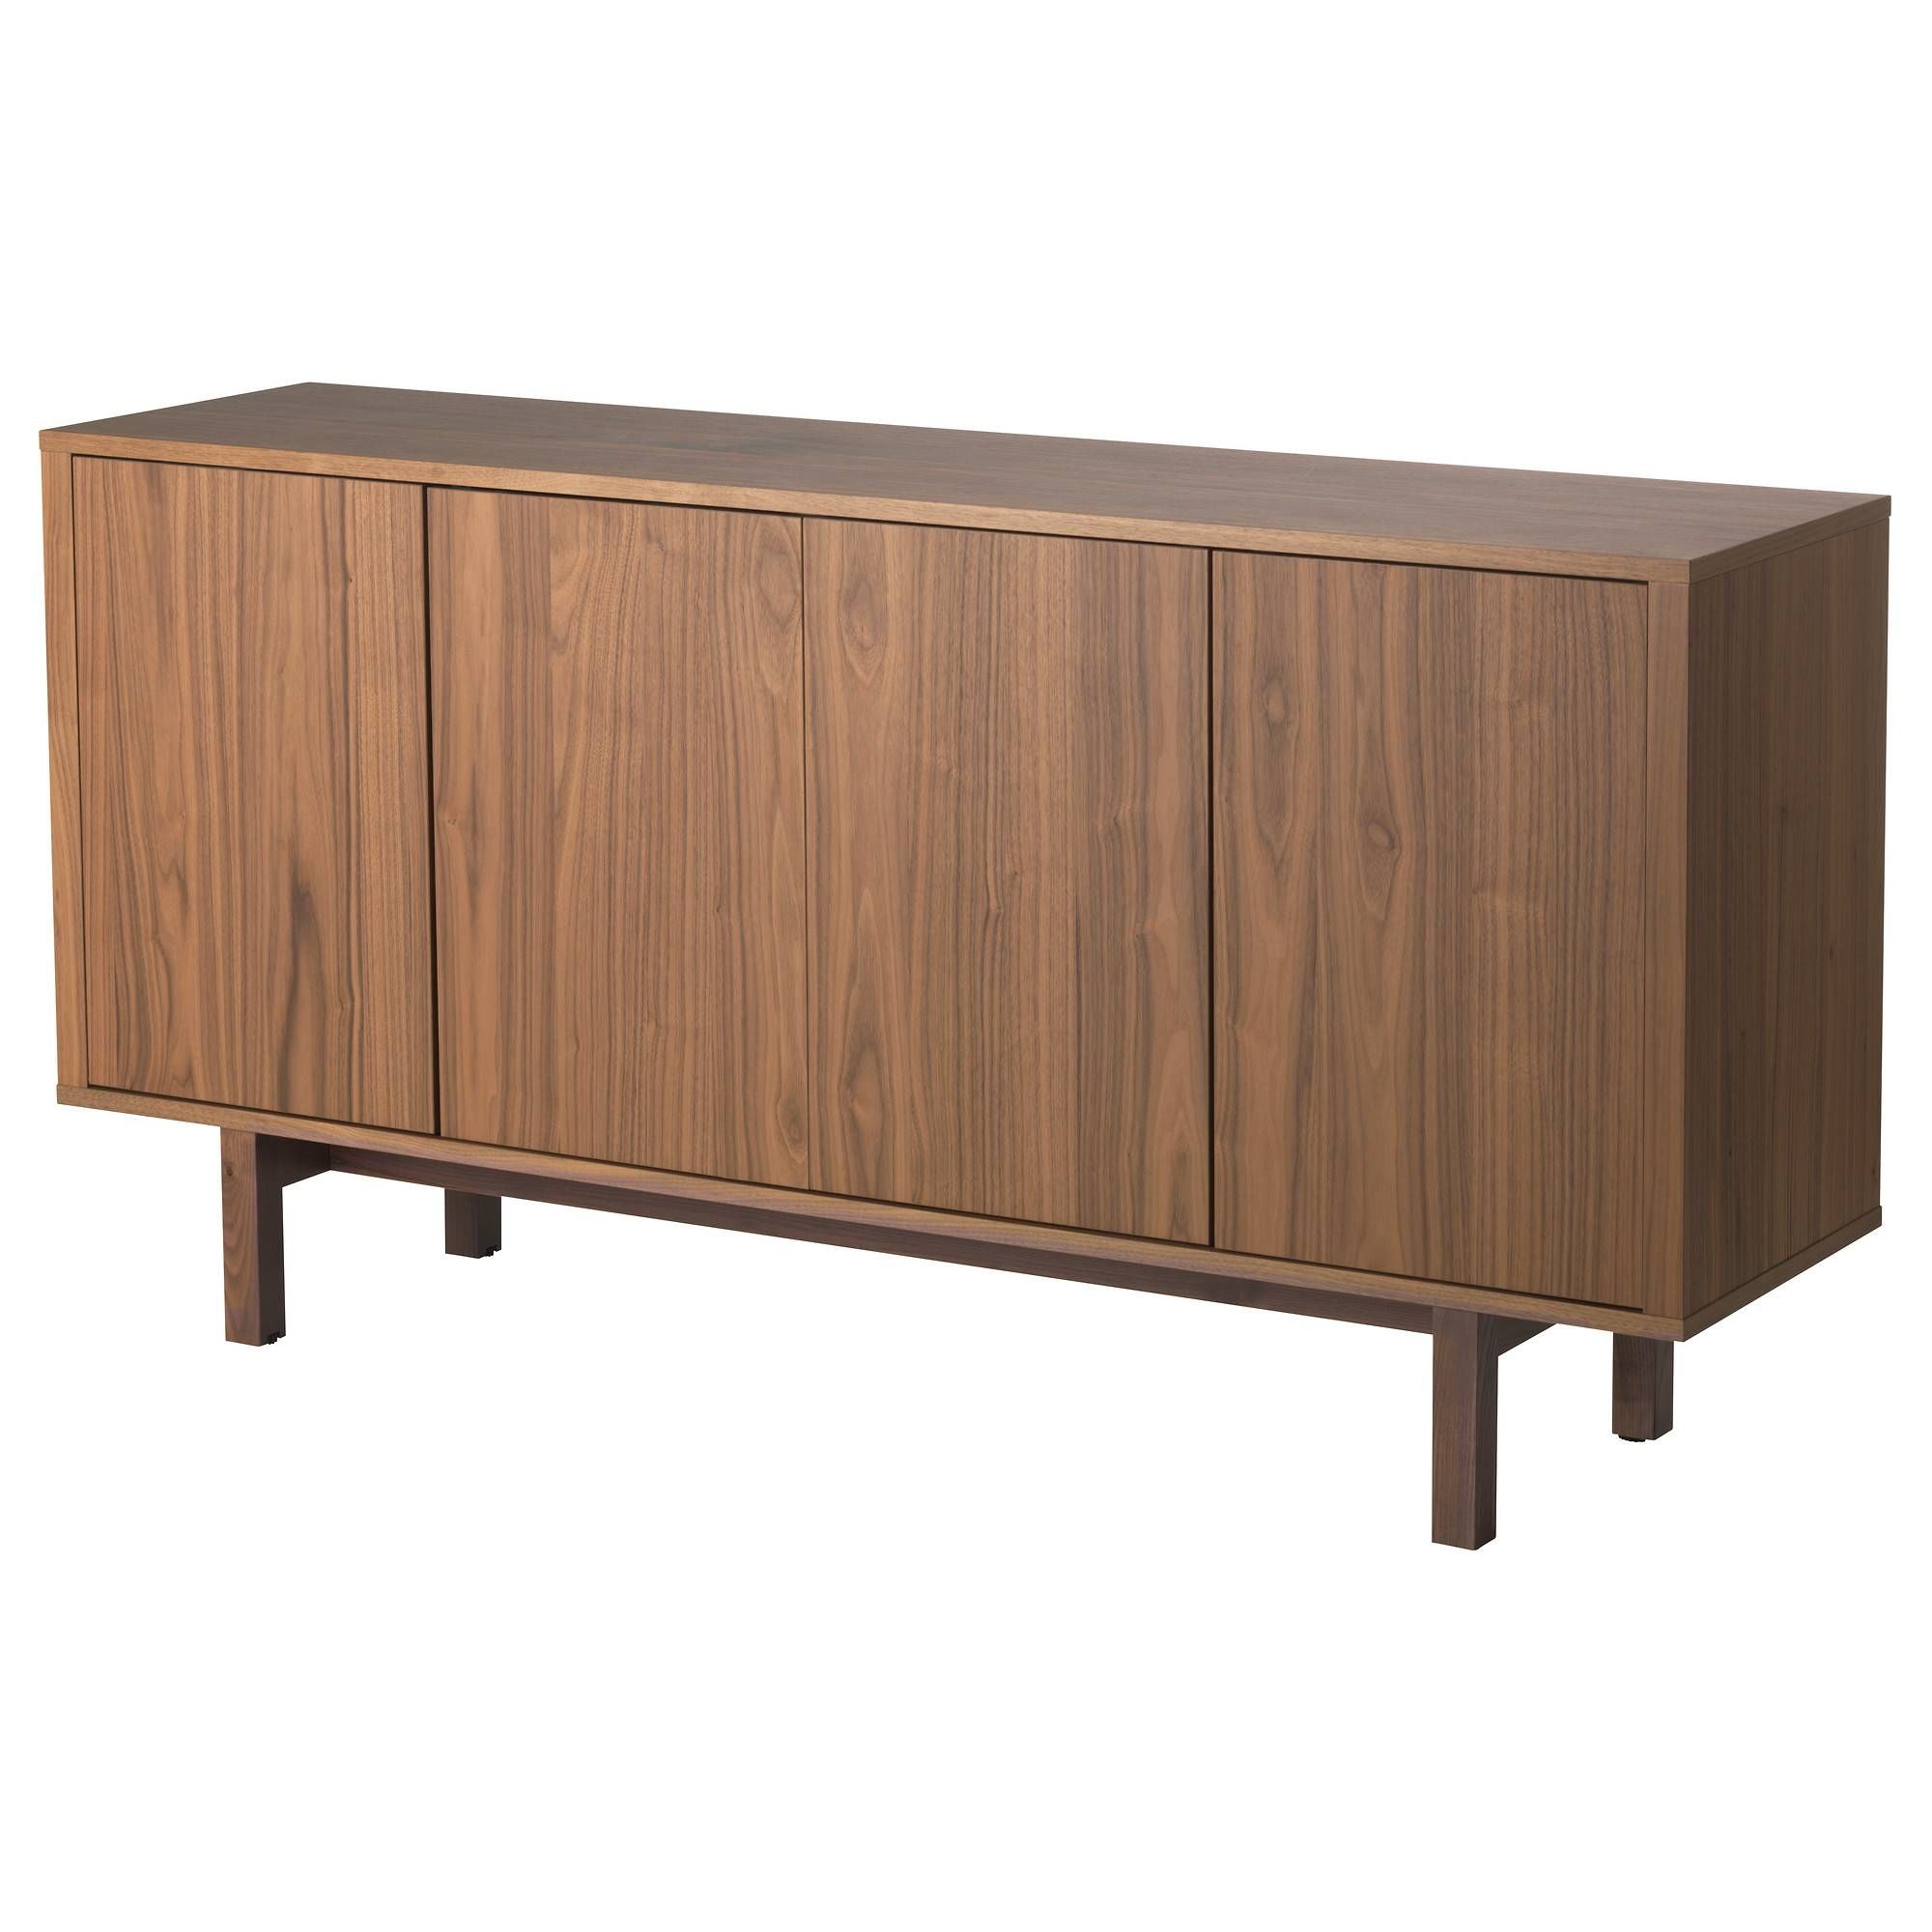 Buffet Tables & Sideboards – Ikea Intended For Most Recently Released Norden Sideboards (View 12 of 15)